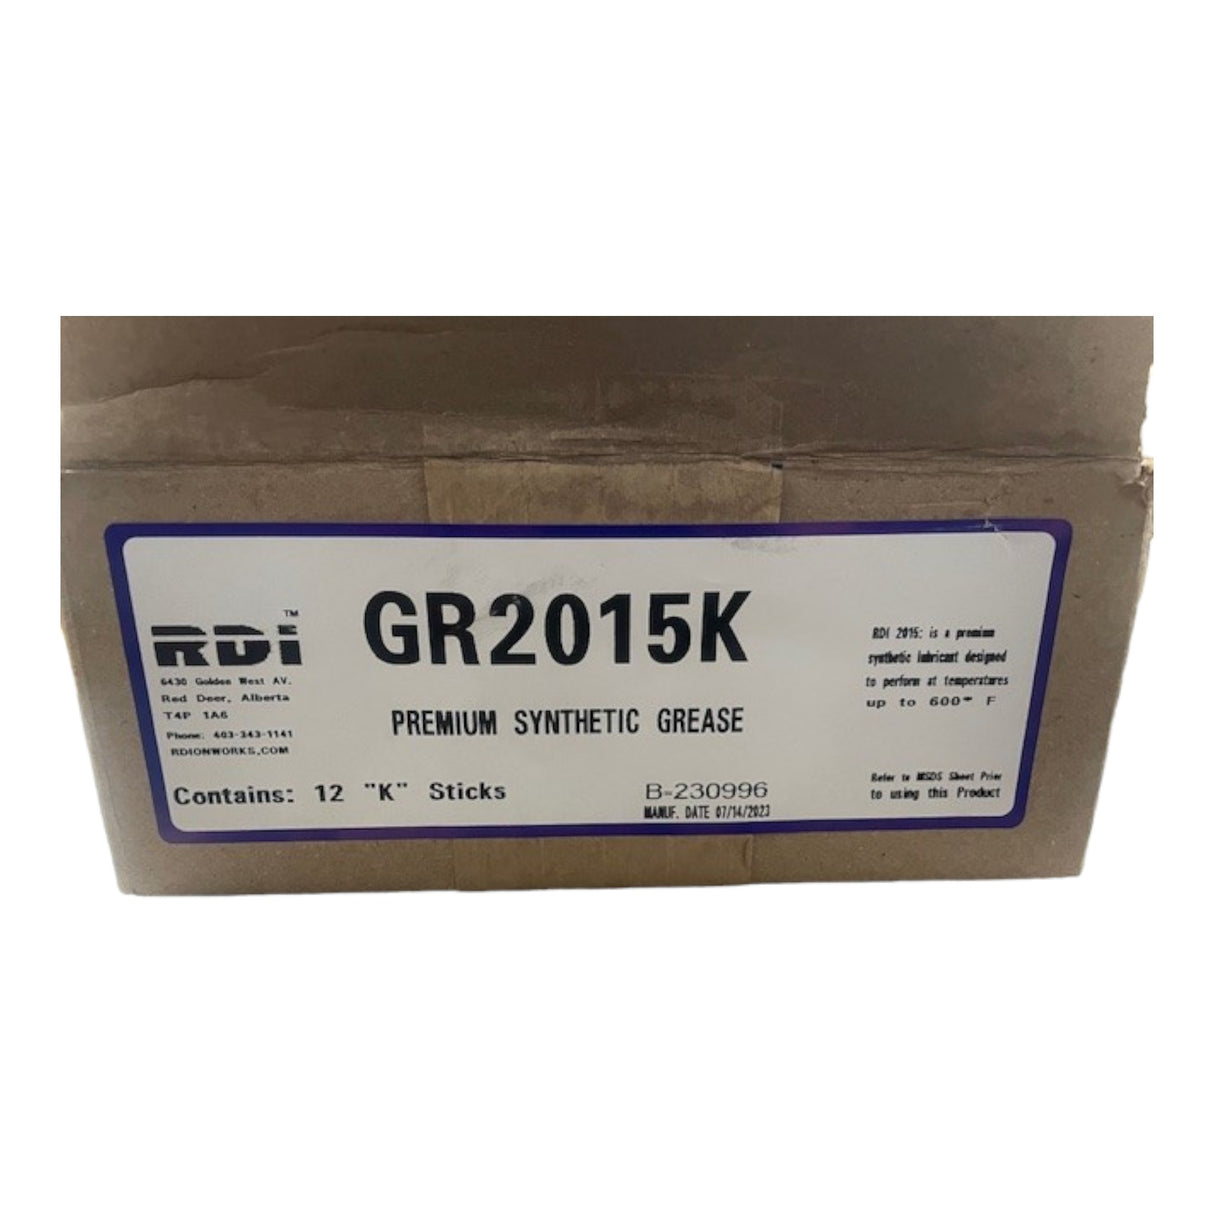 Grease, Premium Synthetic, Used for Plug Valves, Low Temp, STD/ SOUR, 12x K Sticks